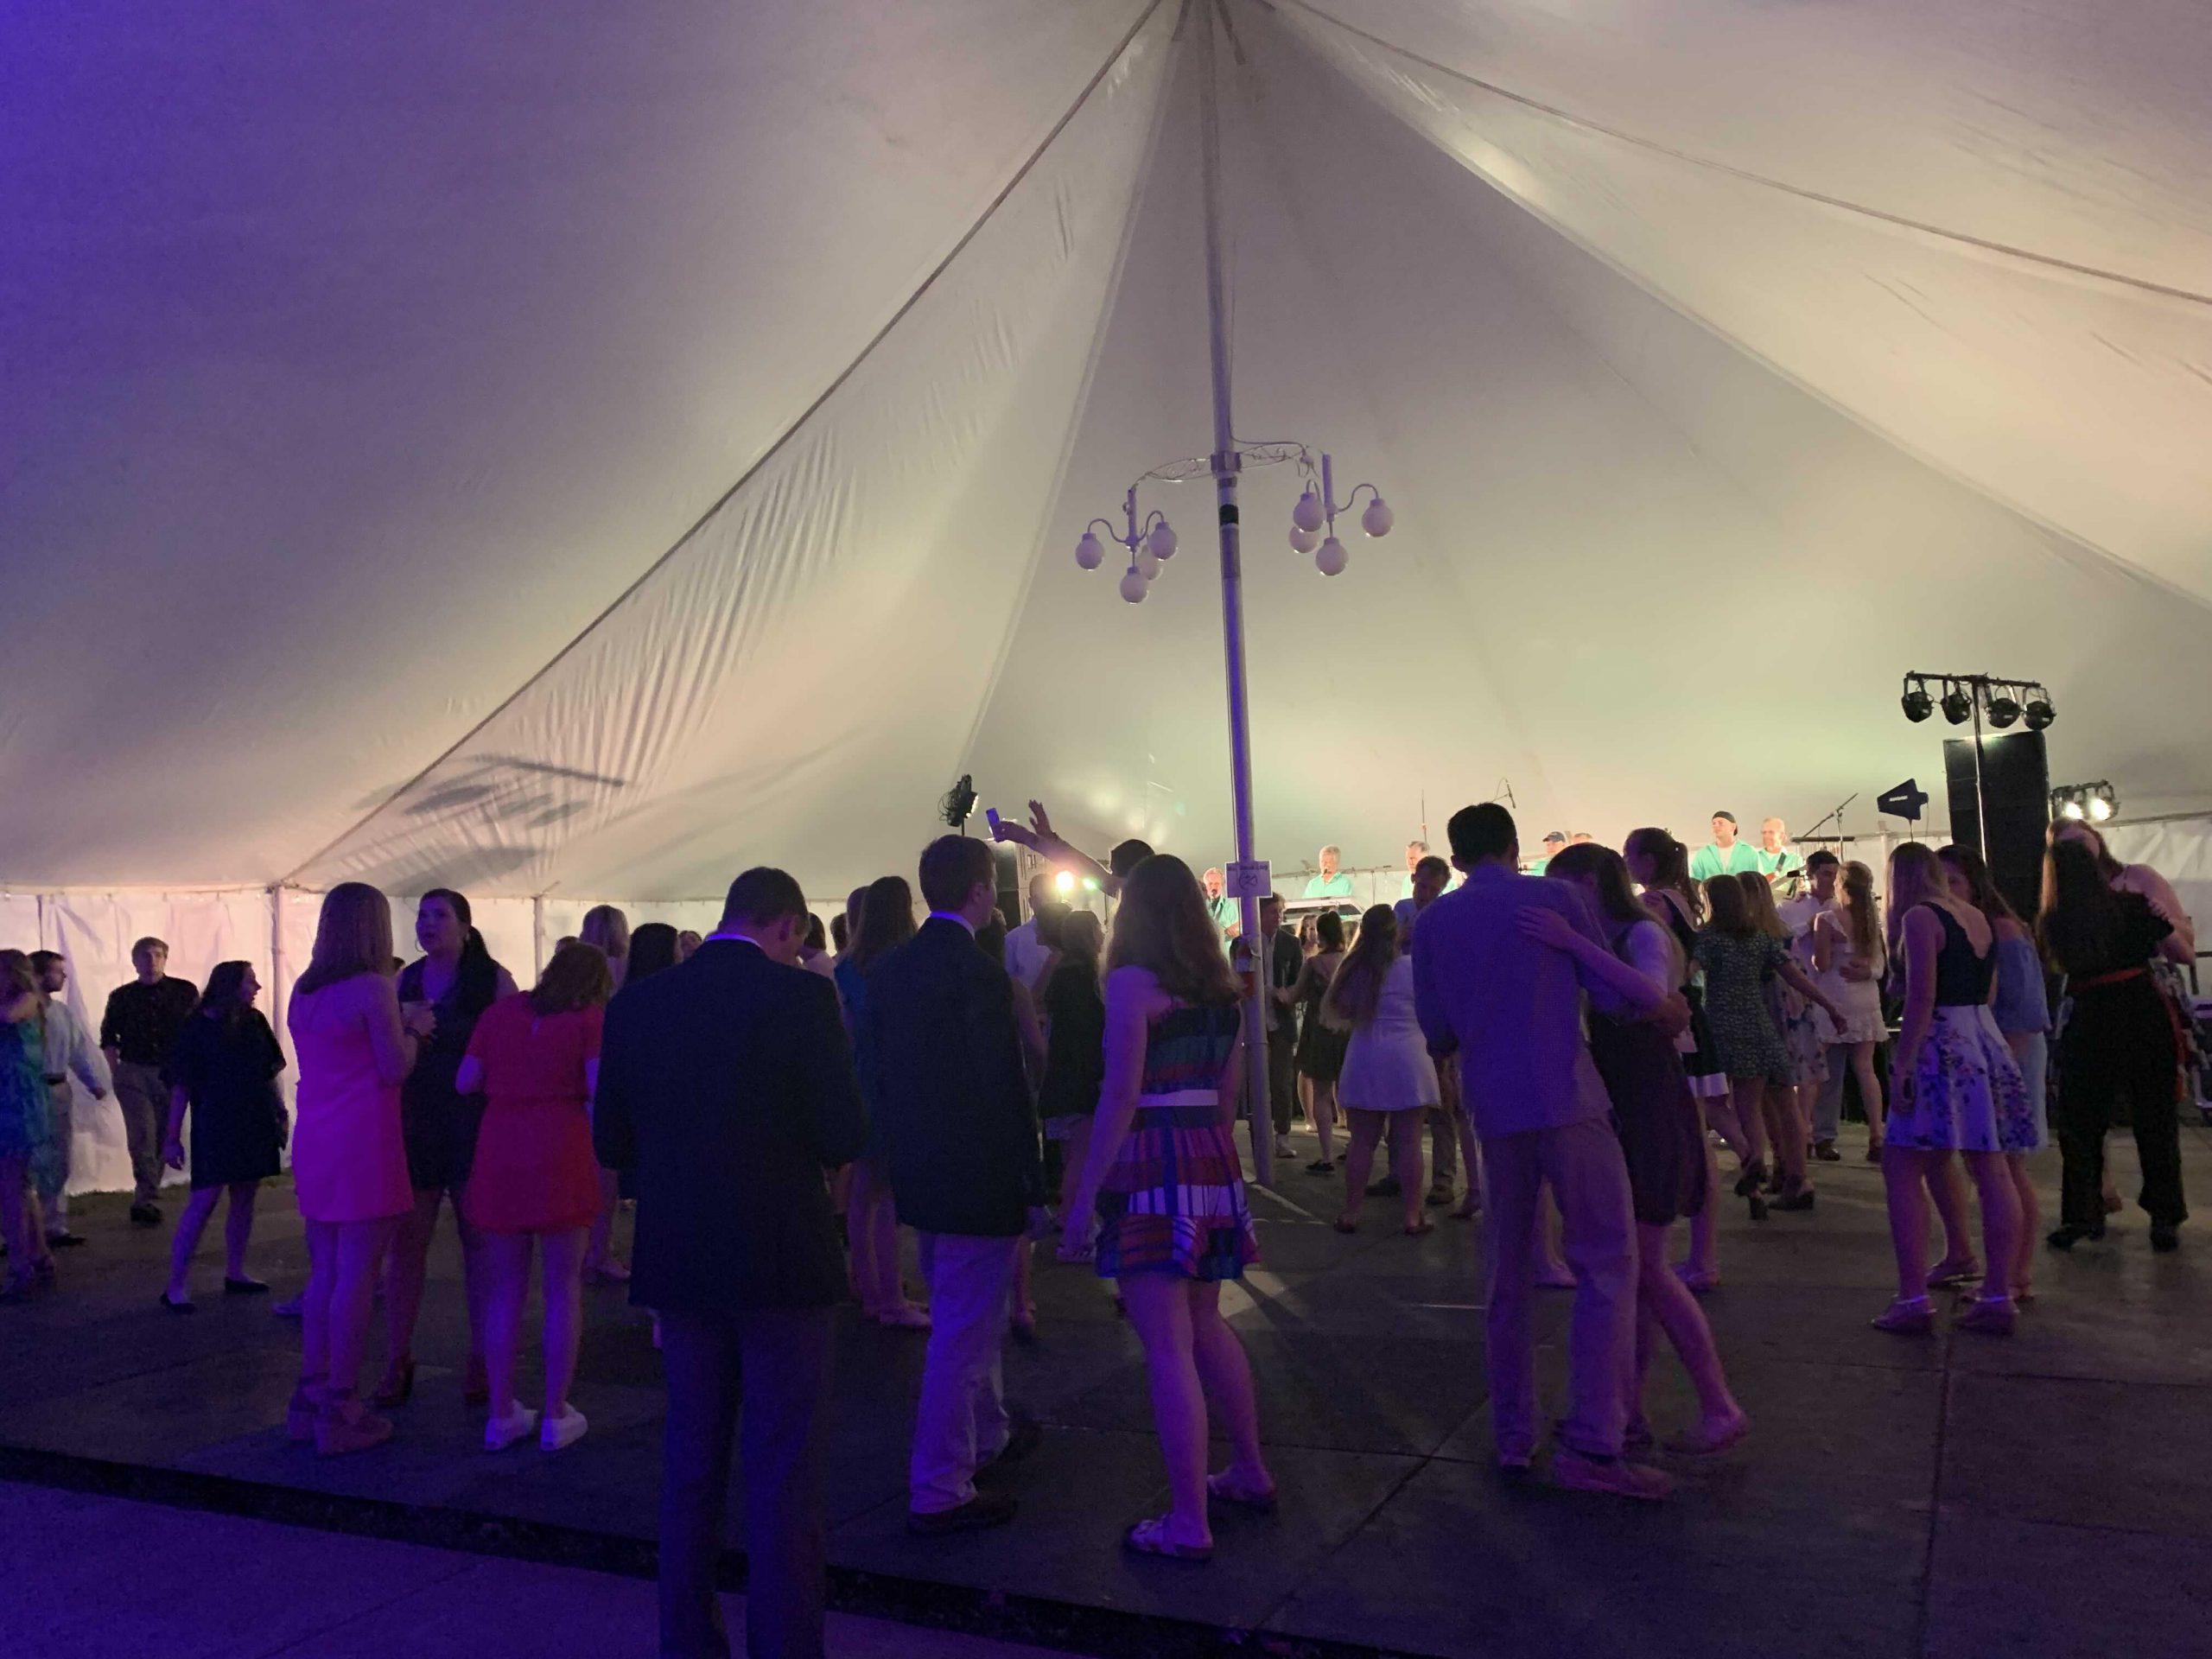 A photograph of a party inside a tent.